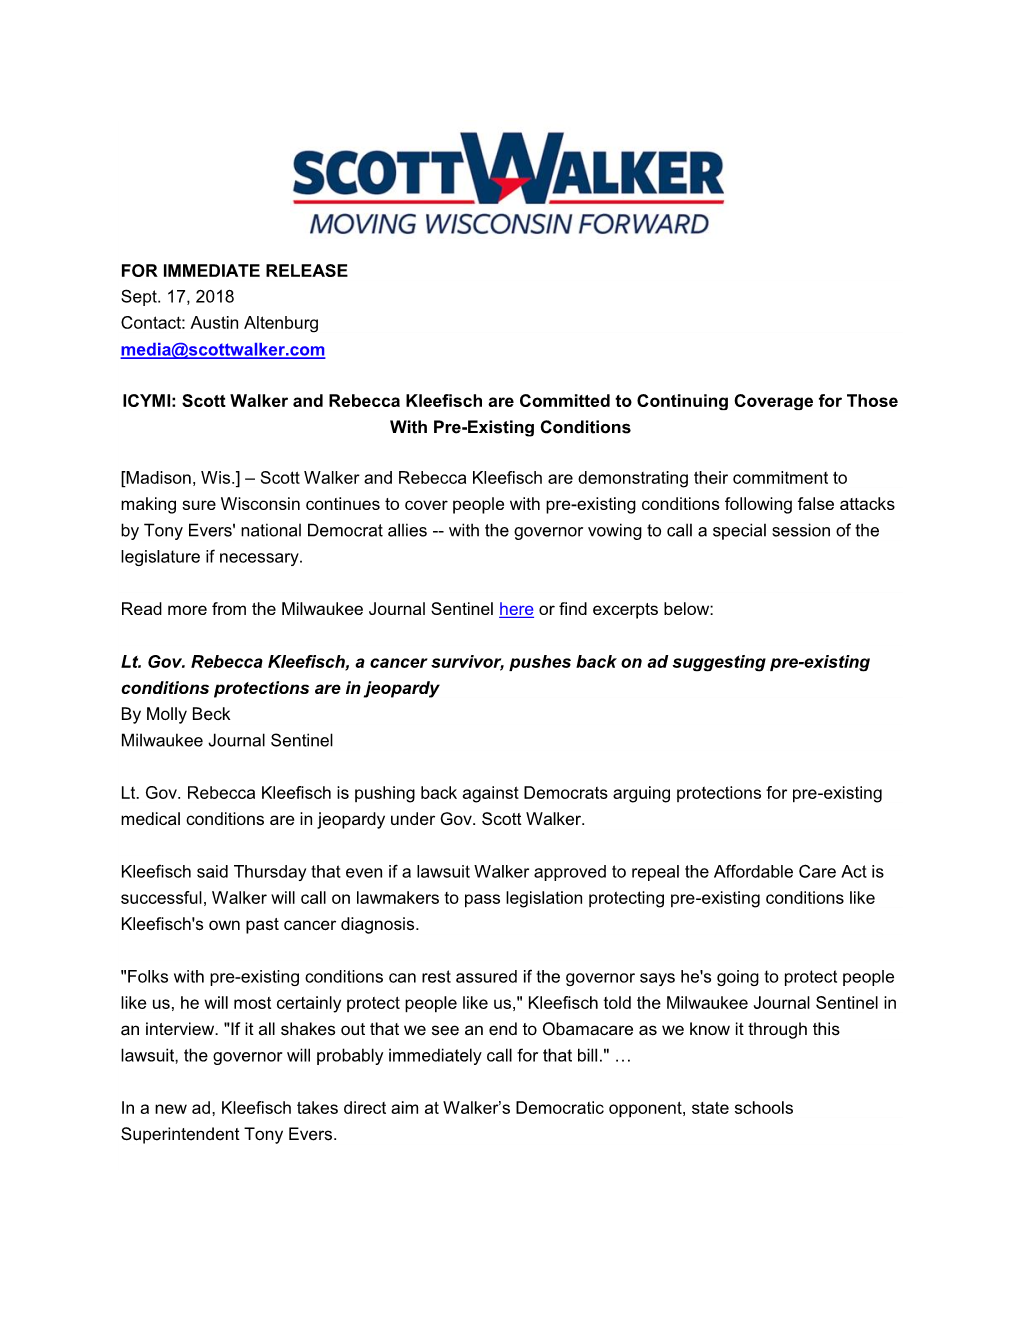 Scott Walker and Rebecca Kleefisch Are Committed to Continuing Coverage for Those with Pre-Existing Conditions